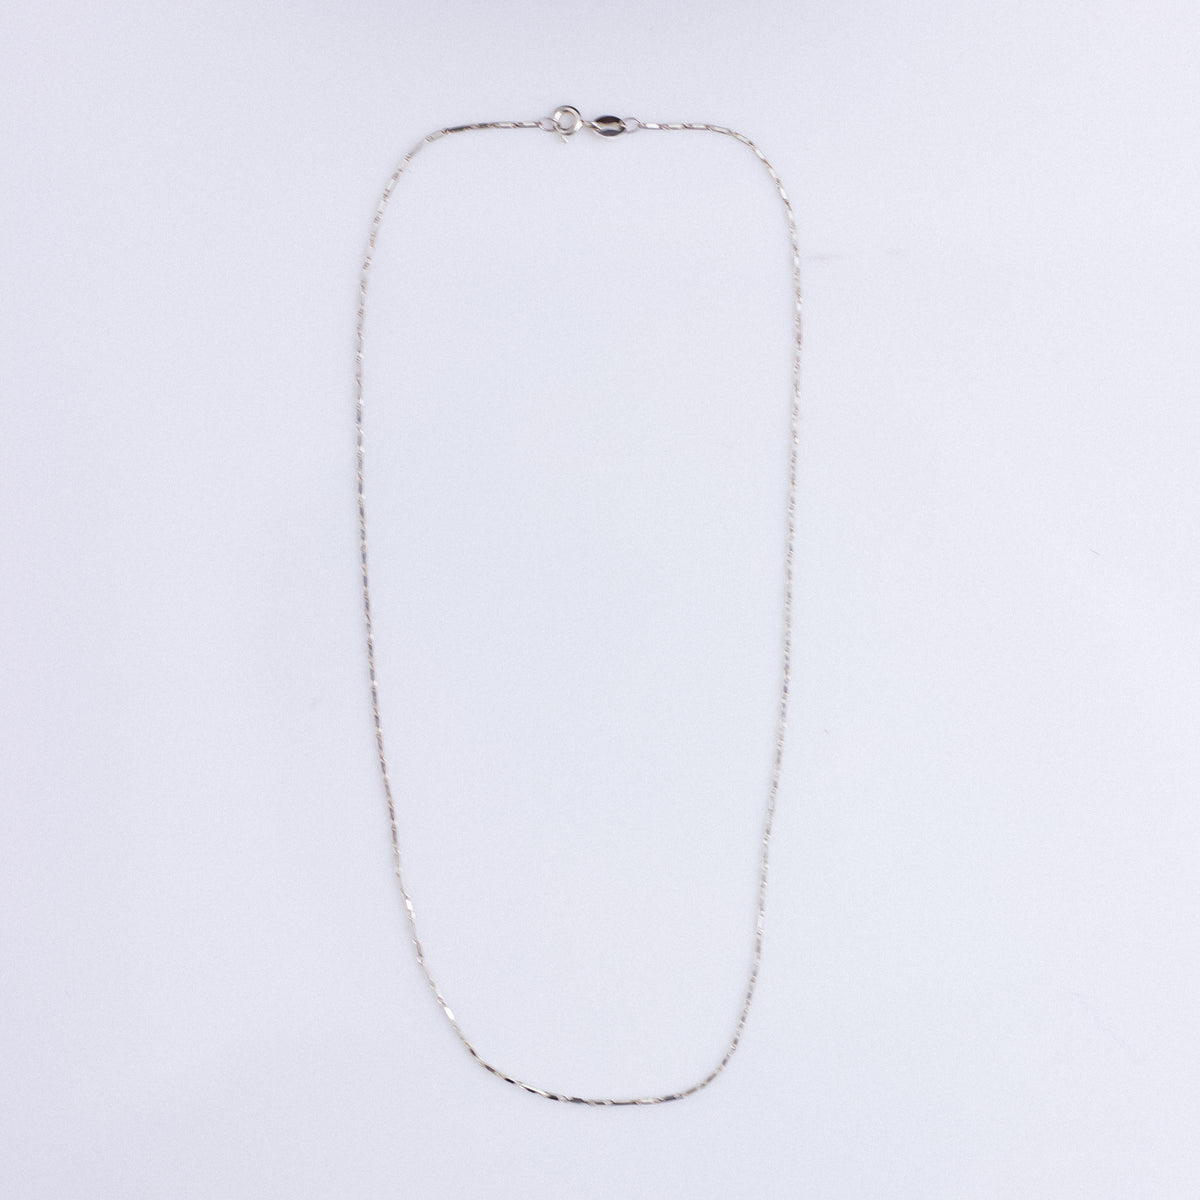 Handmade 925. Sterling Silver Link Chain | 16 inches